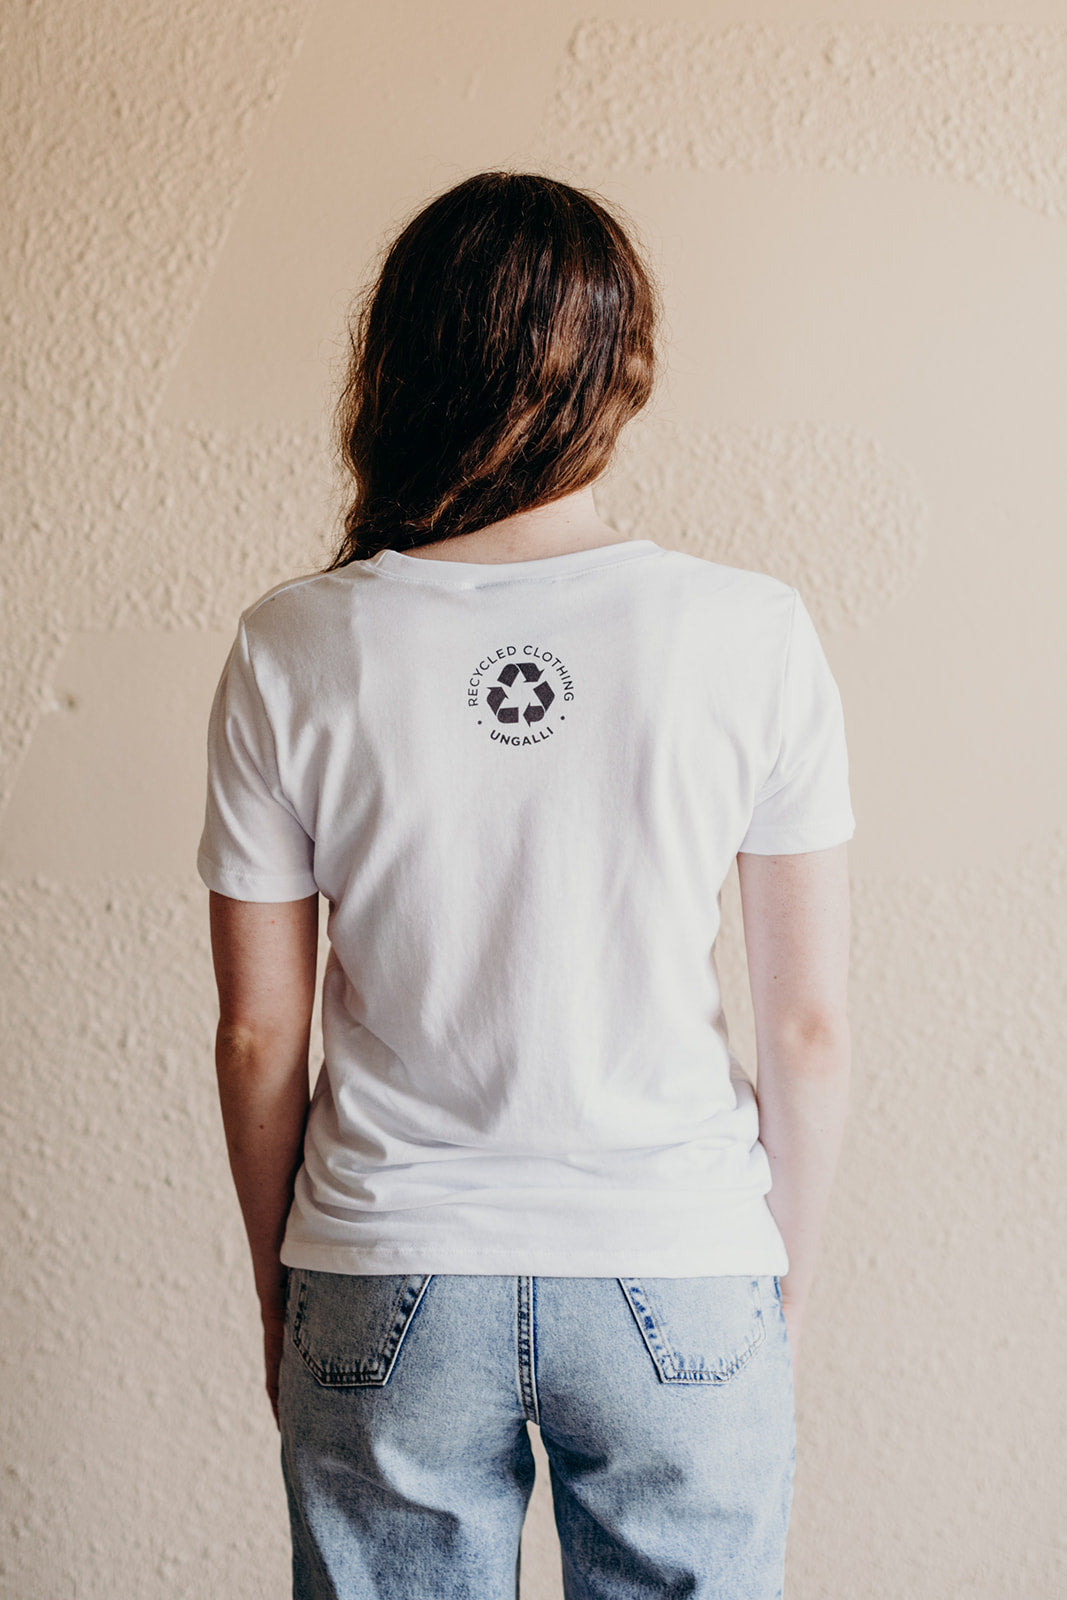 Women's white organically made t-shirt with bee design on front